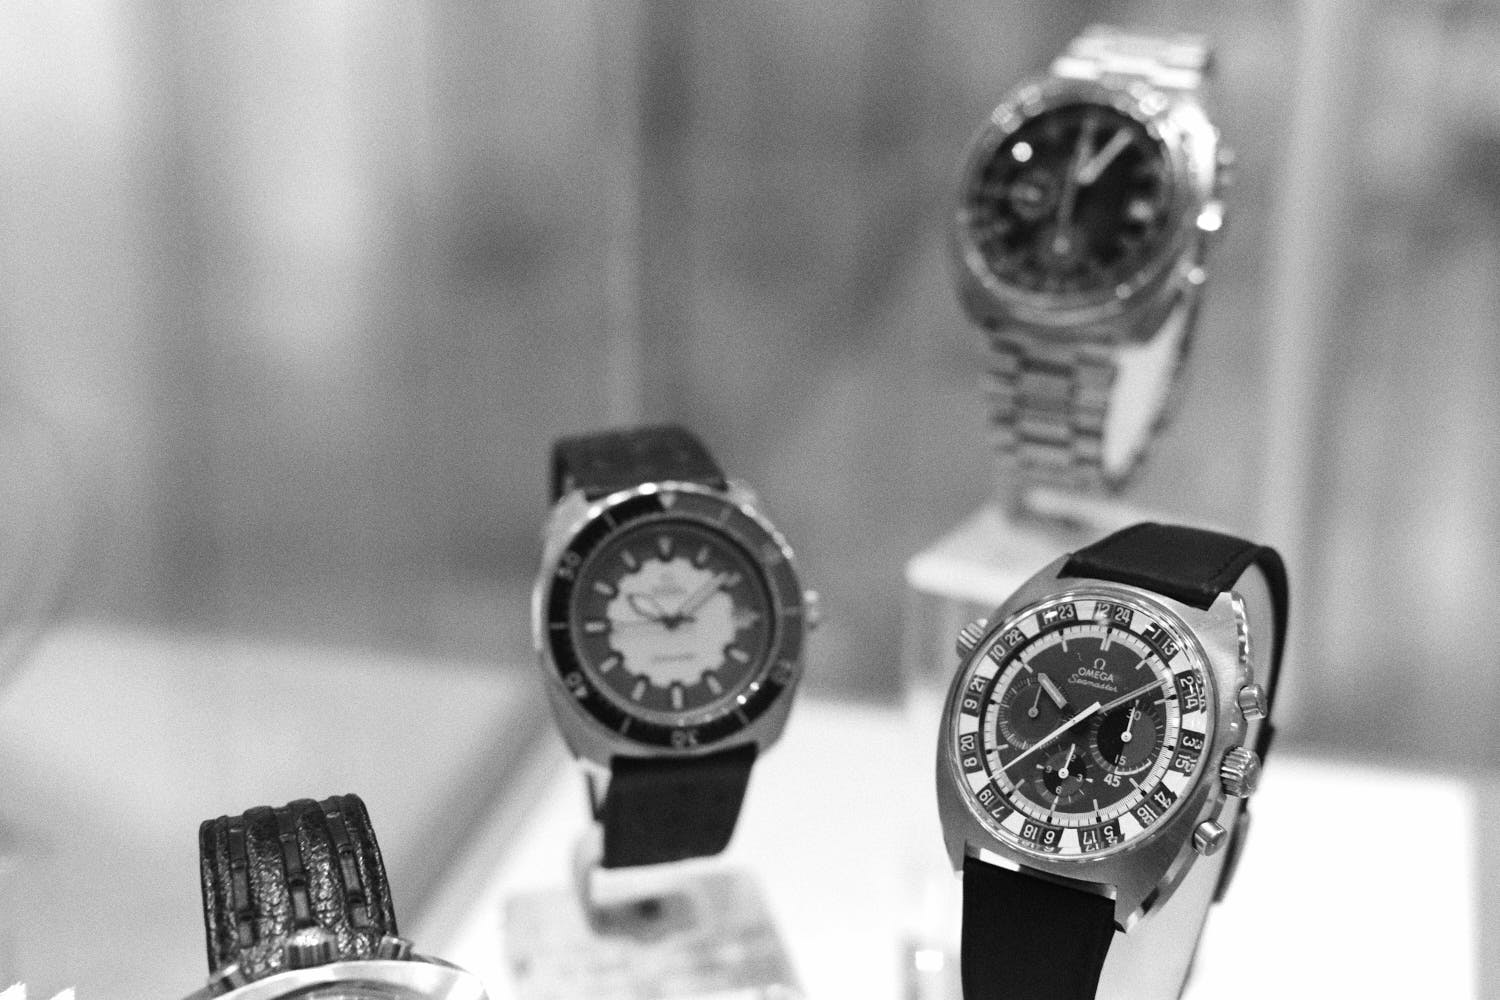 Seamaster-variants-Omega-Museum-Visit-Monochrome-Watches